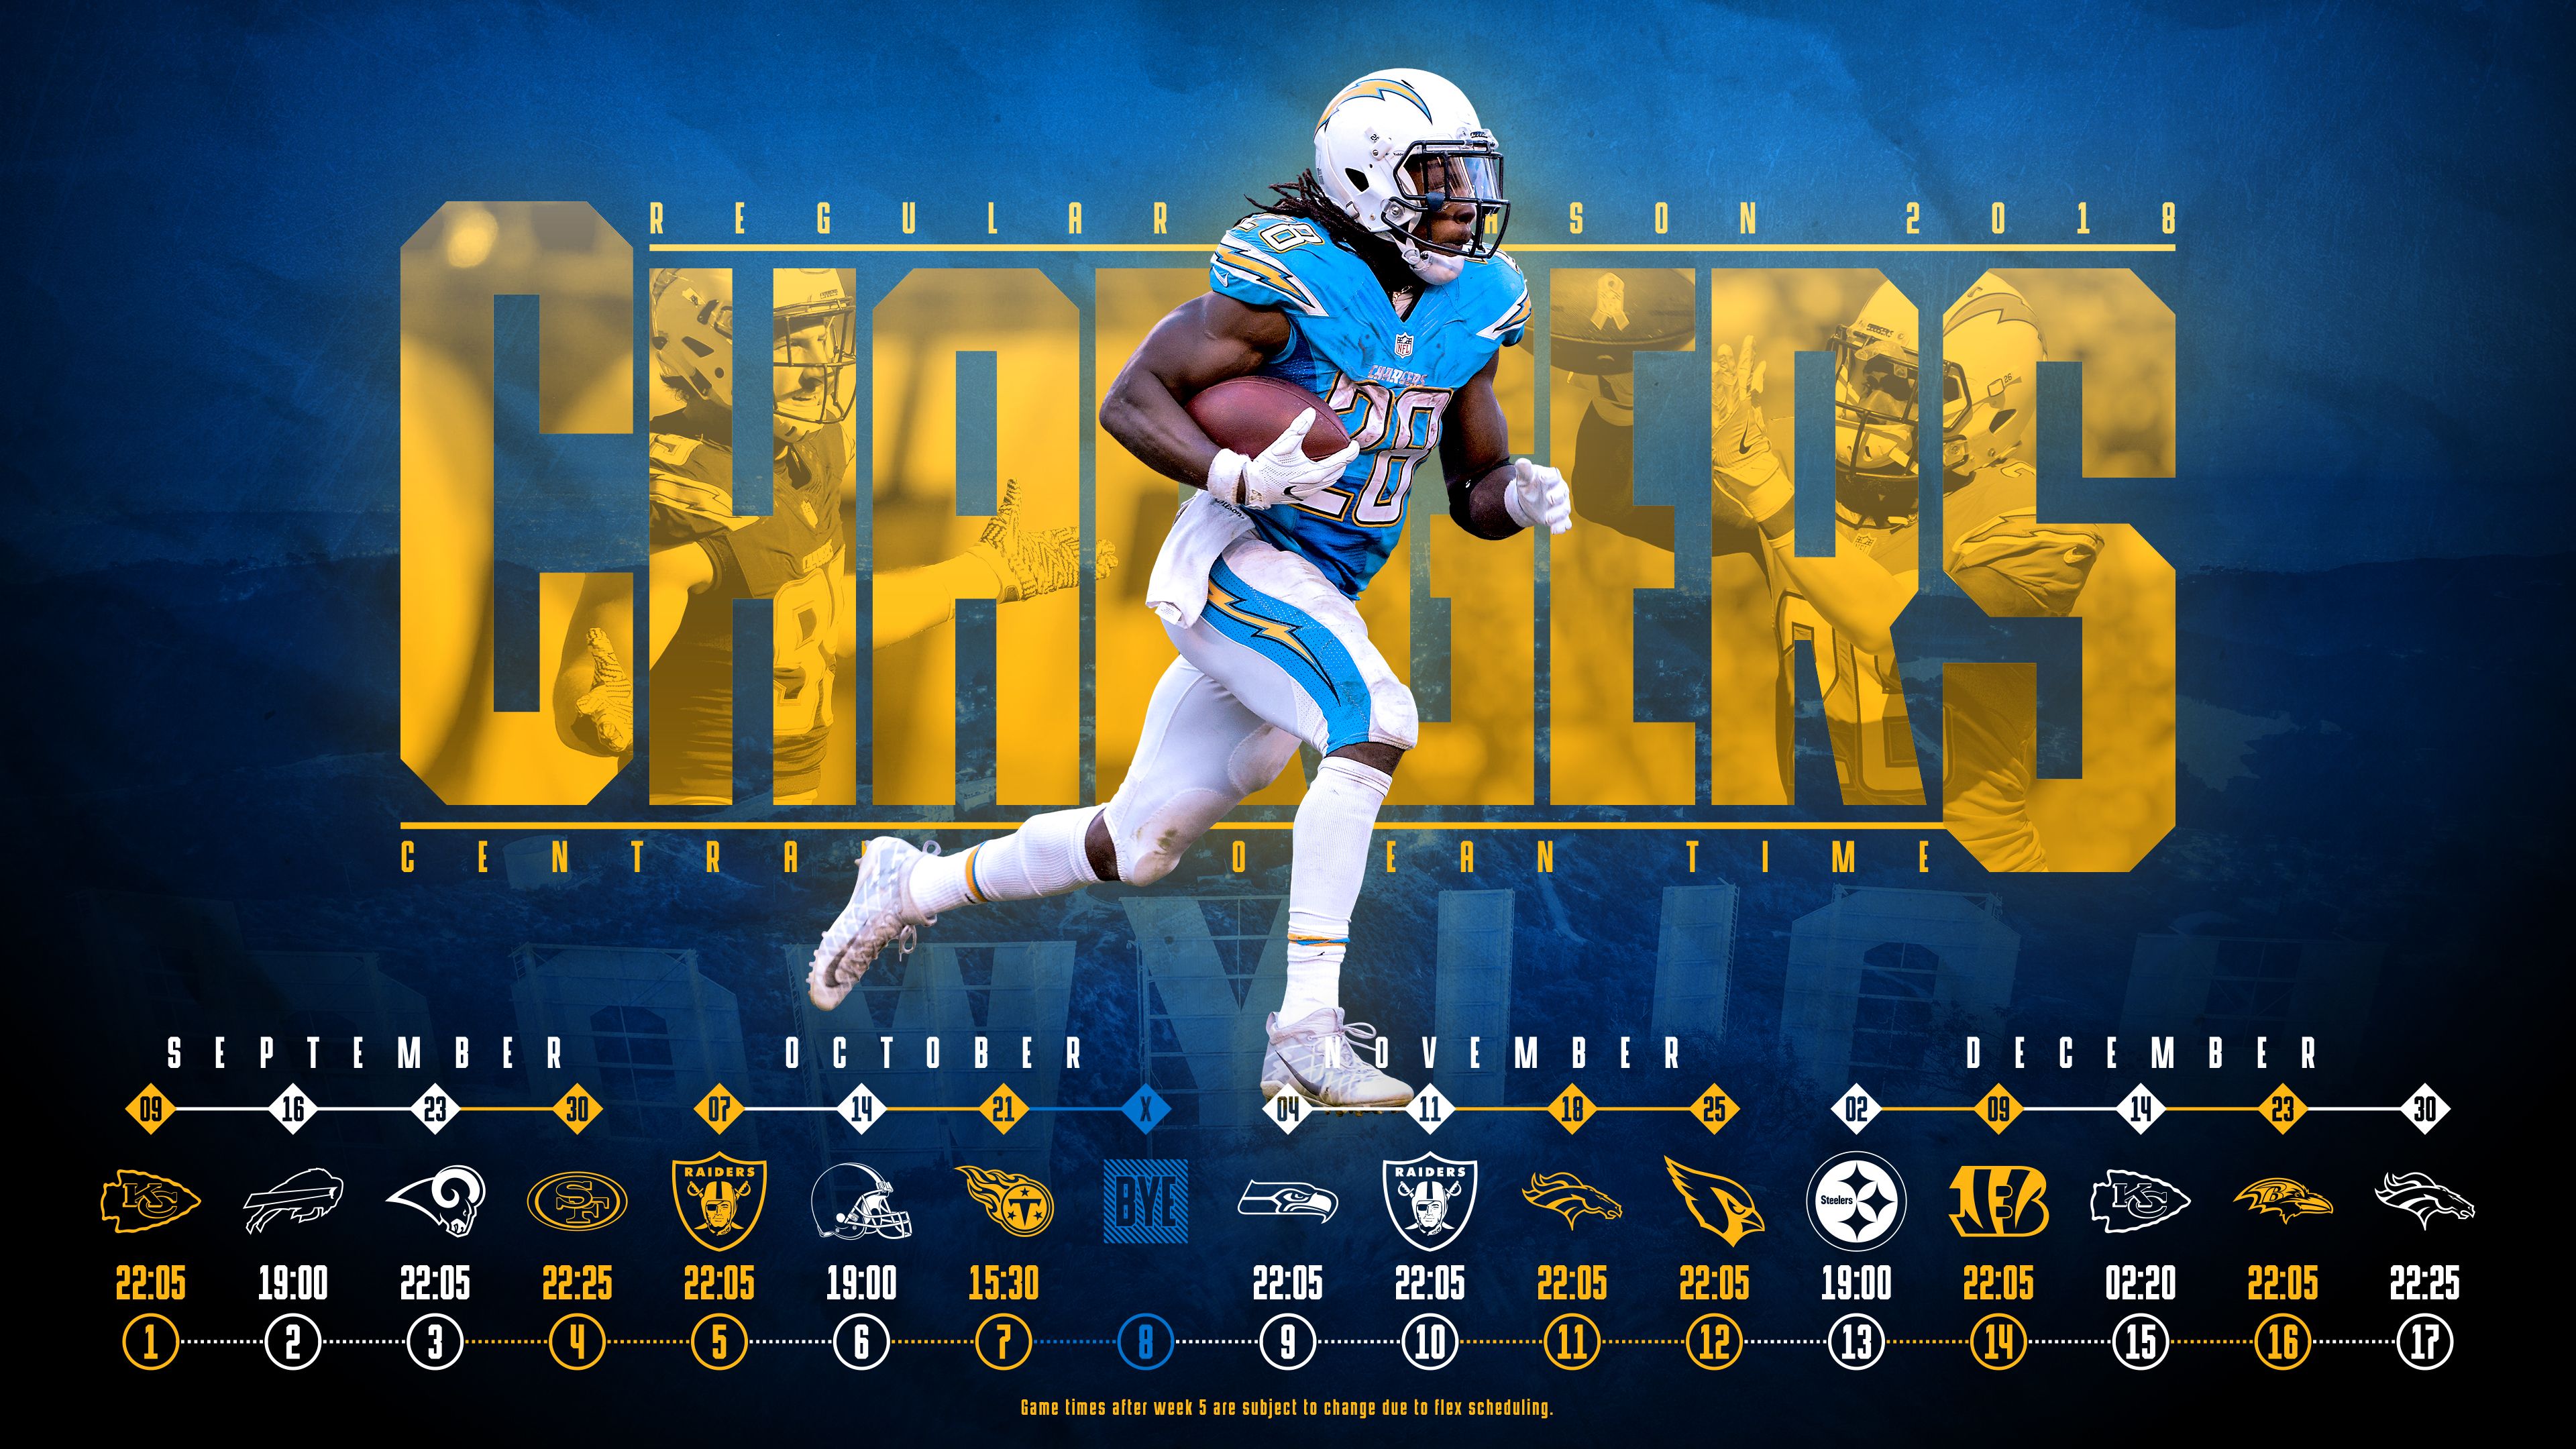 Schedule Wallpaper For The Los Angeles Chargers Regular Season